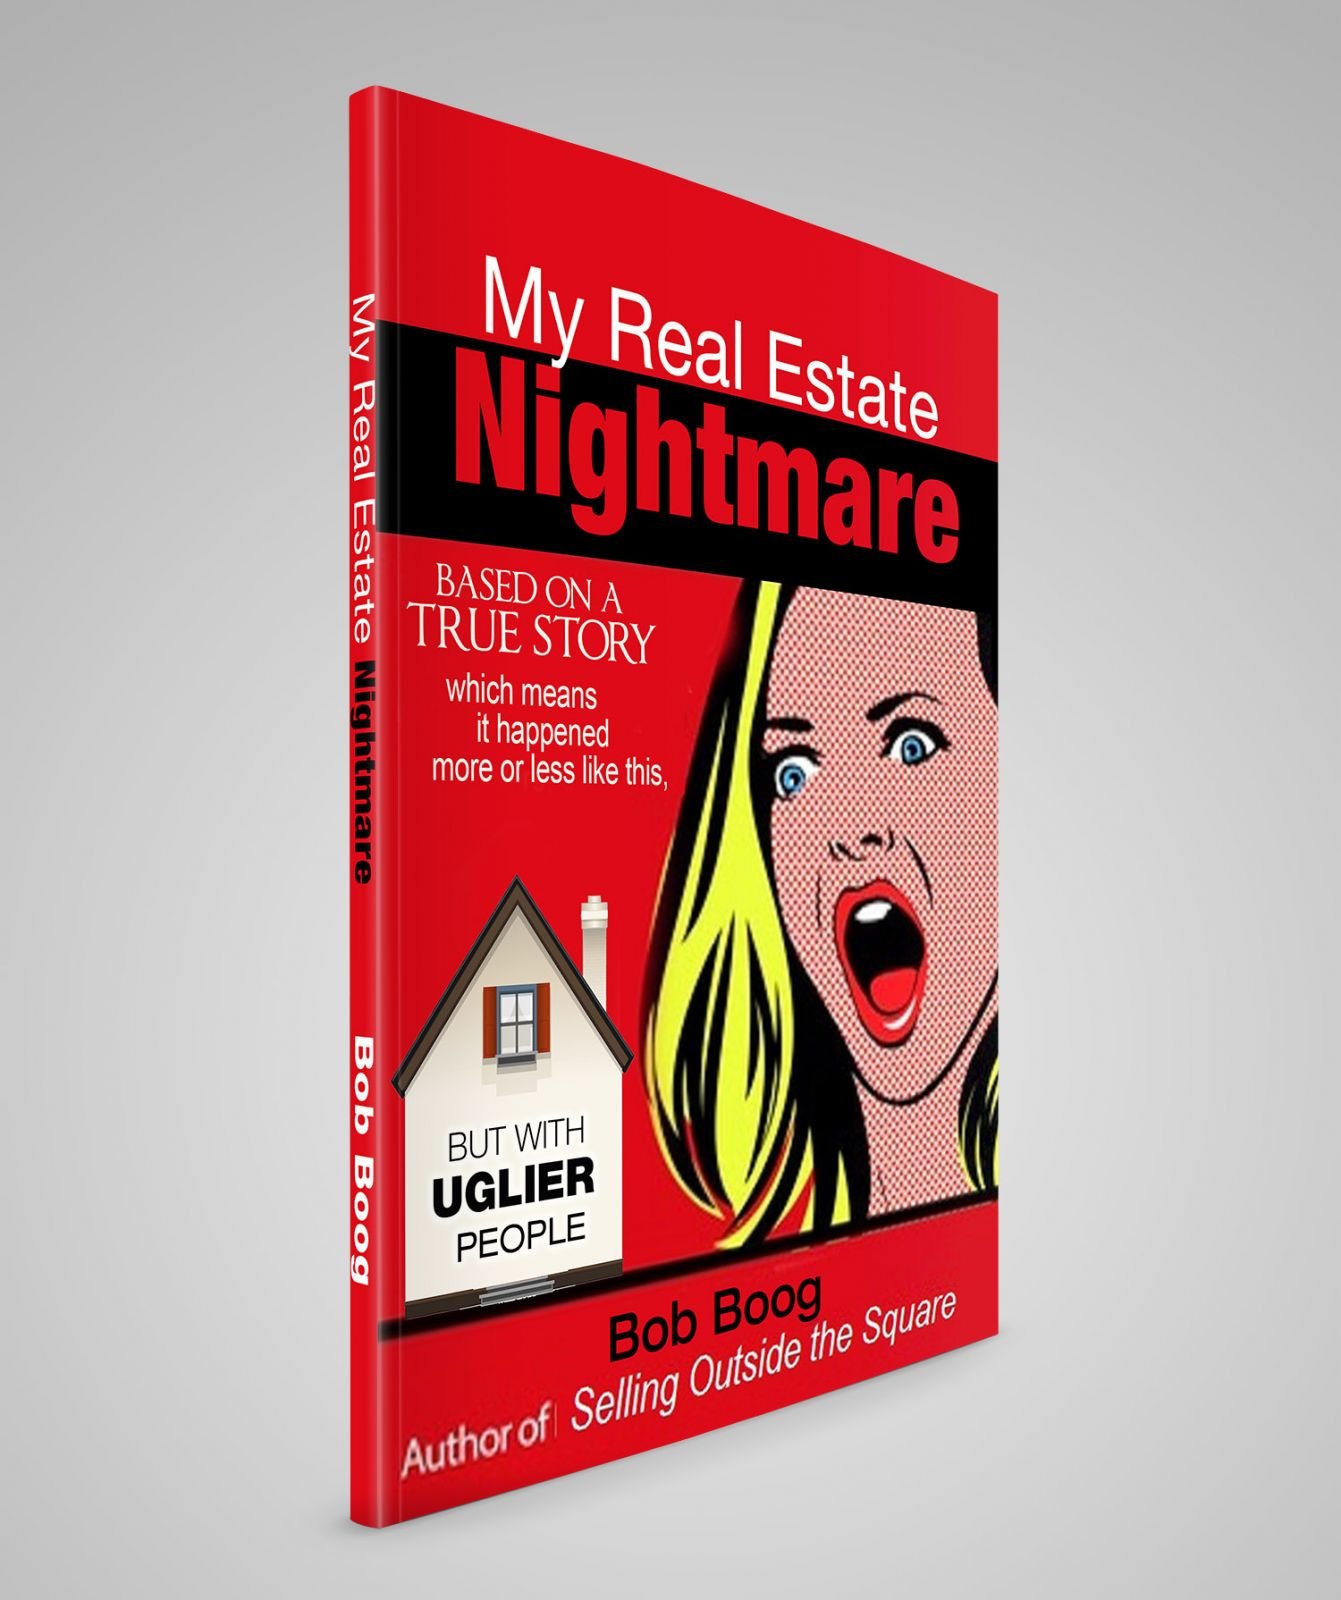 "My Real Estate Nightmare is a funny book"